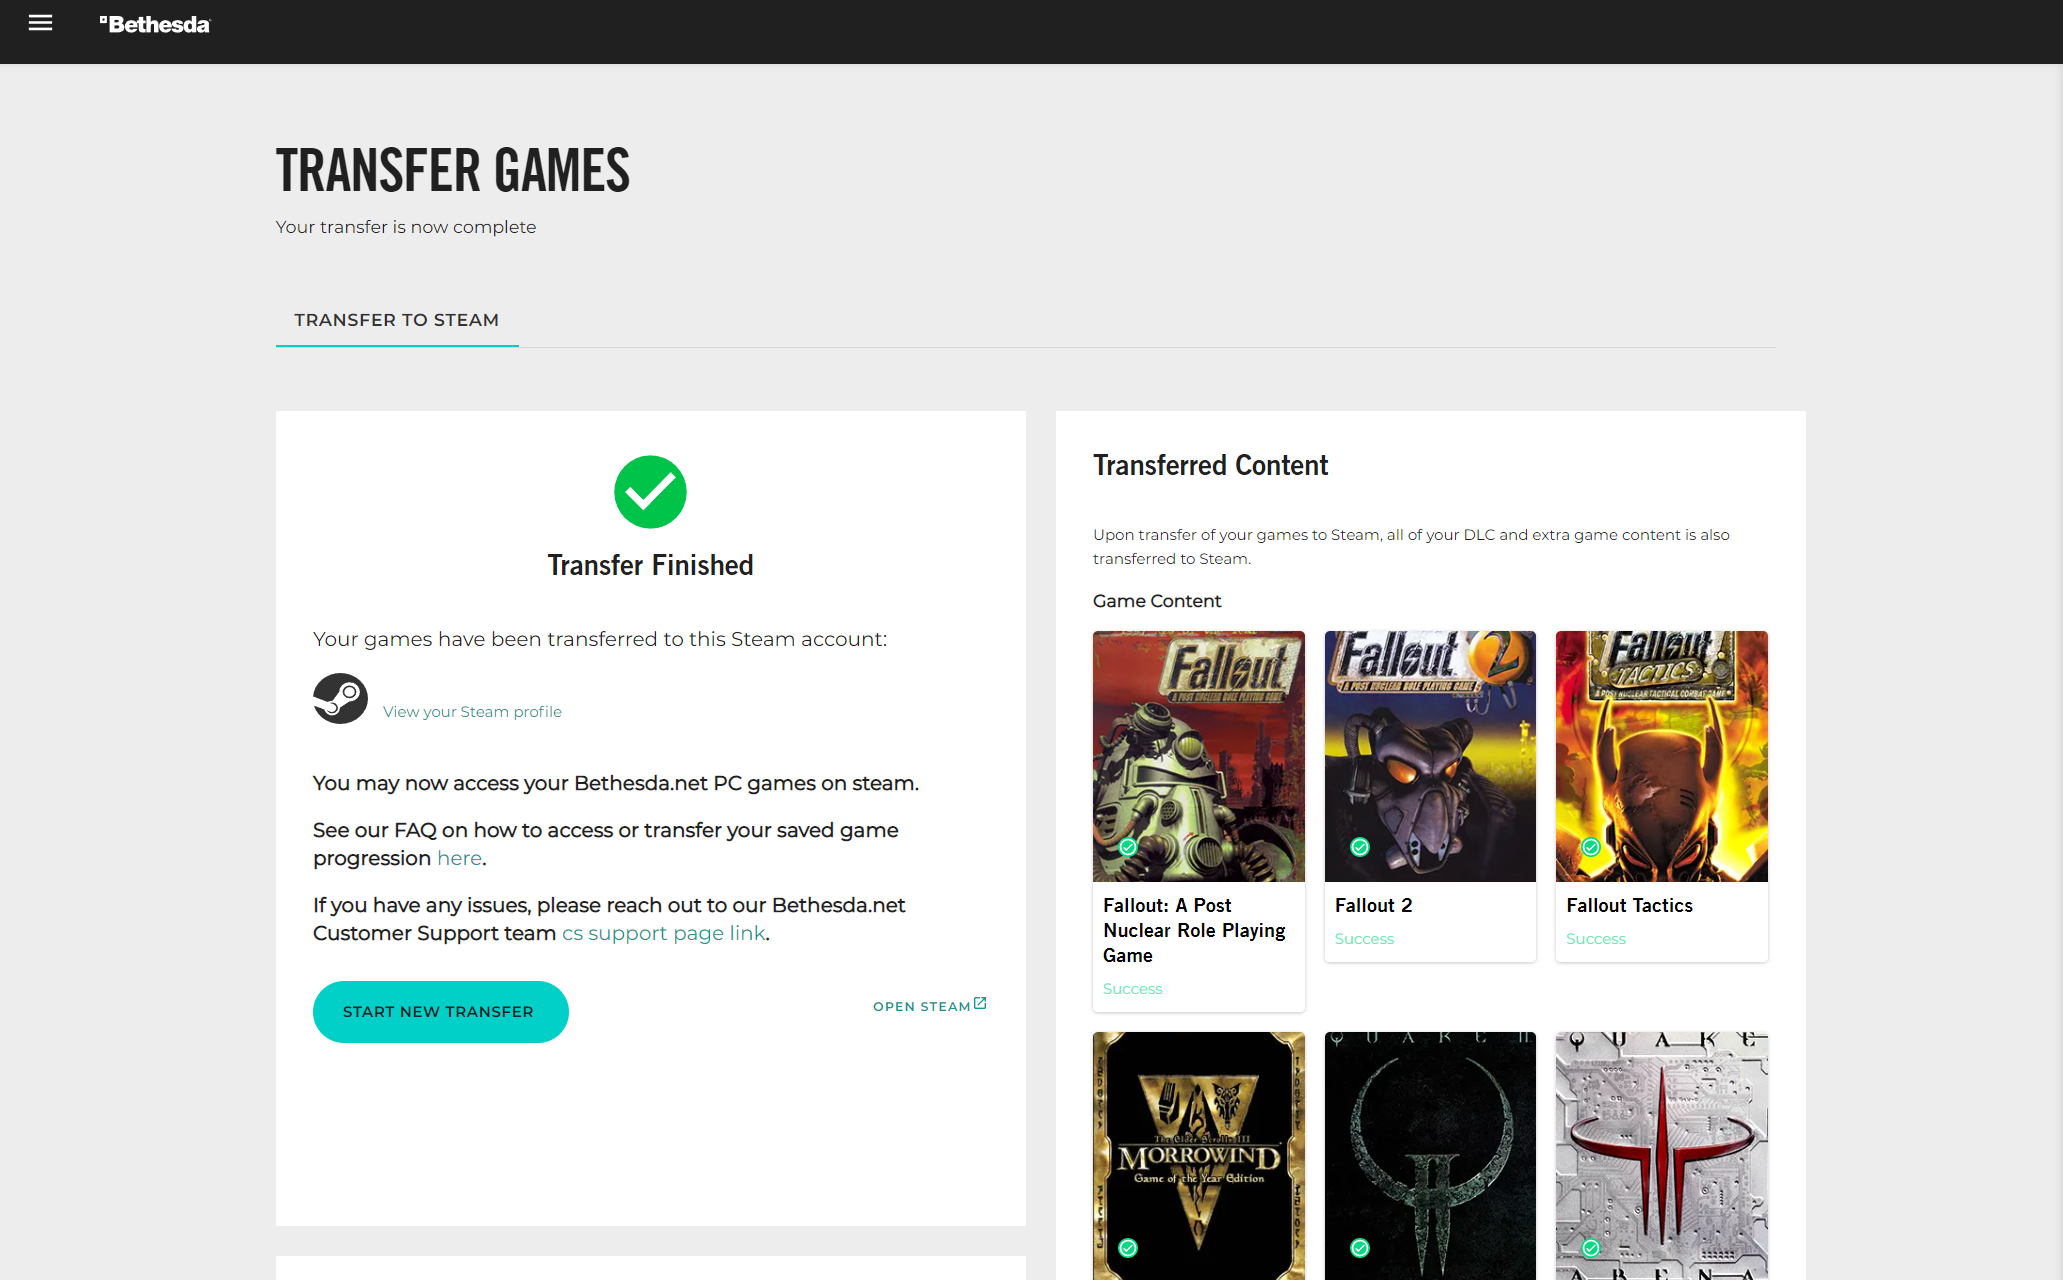 Success! Goodbye forever, Bethesda Launcher.